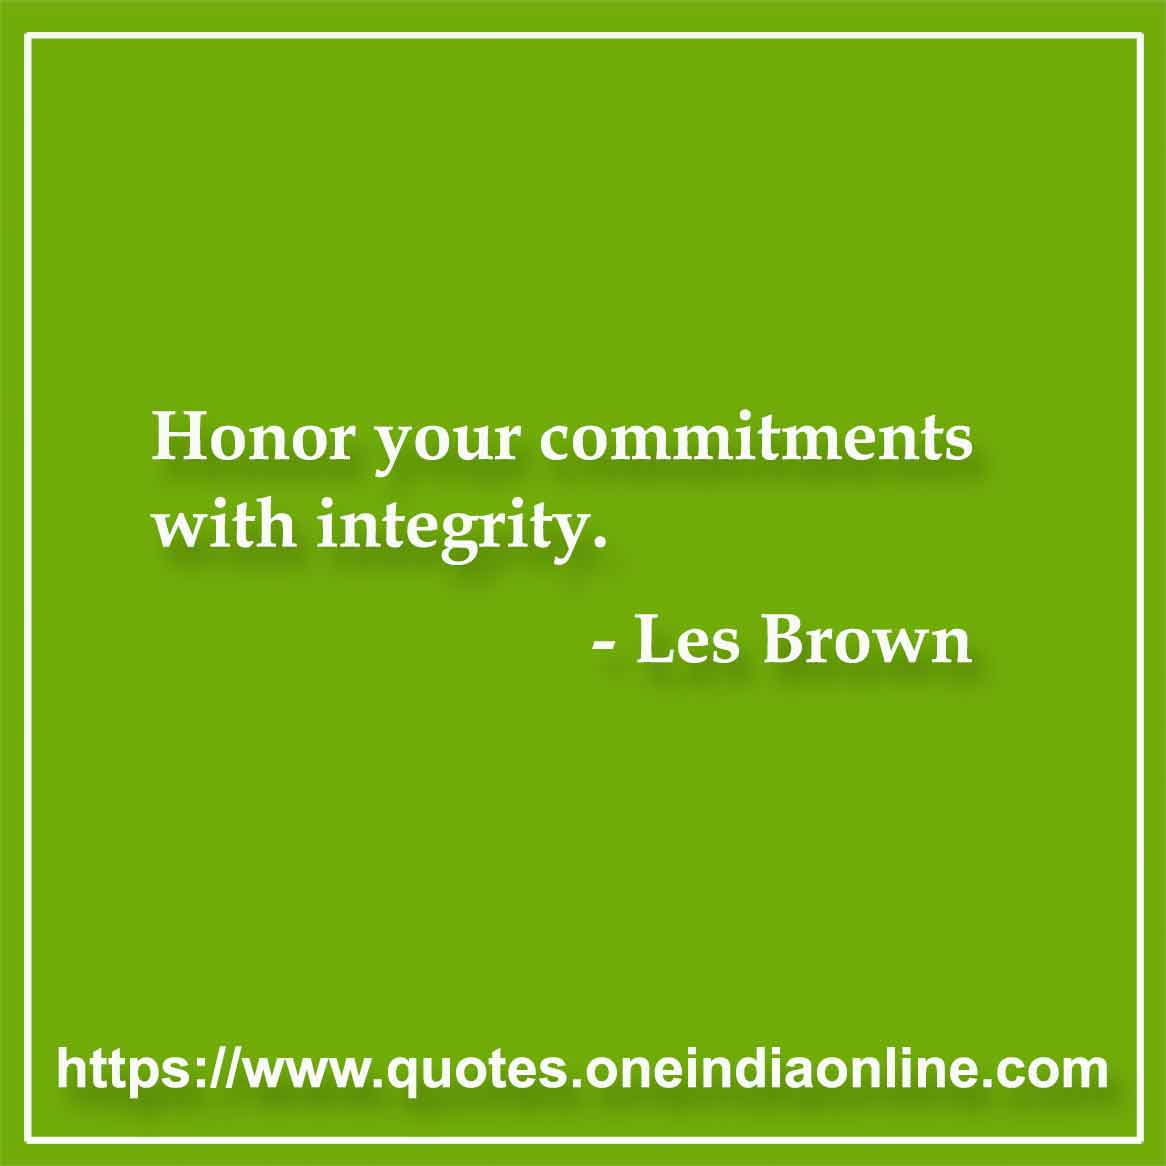 Honor your commitments with integrity.

- Les Brown